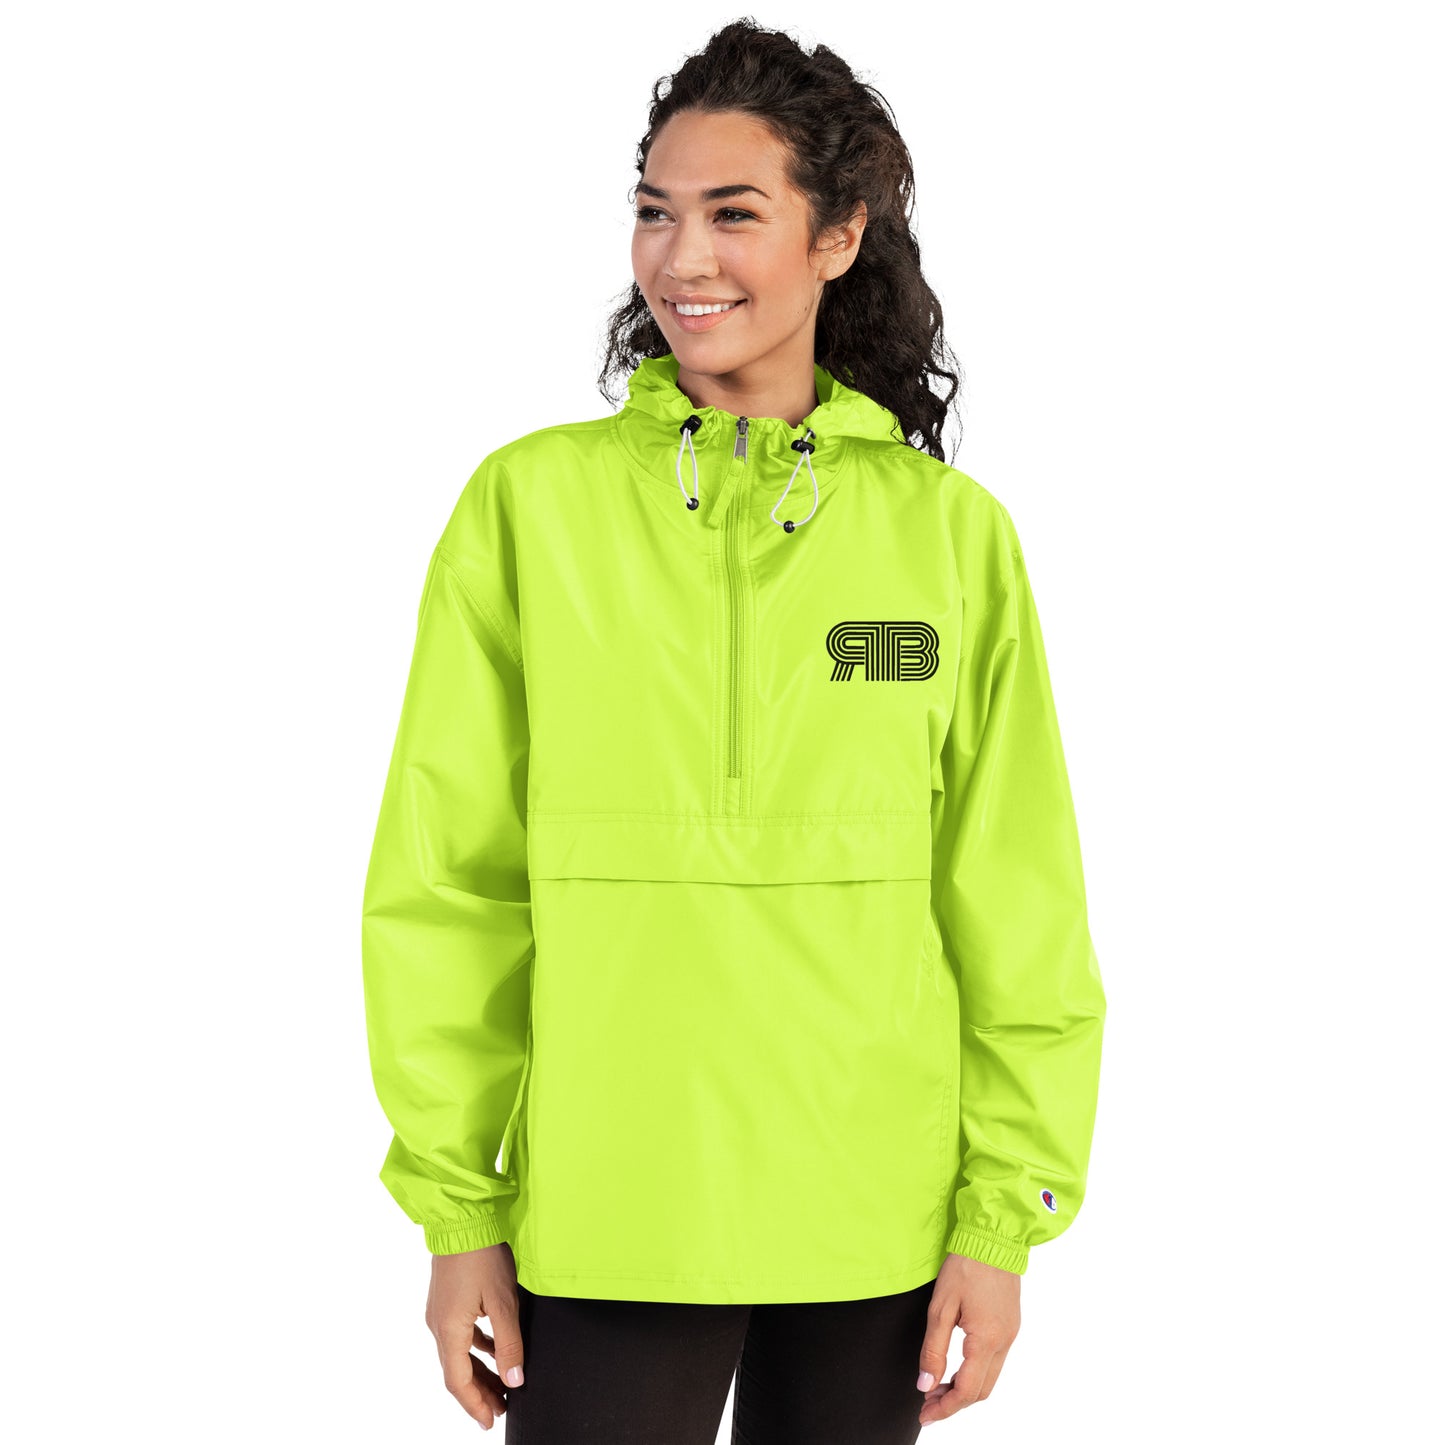 RB Champion Packable Jacket (Safety Green)